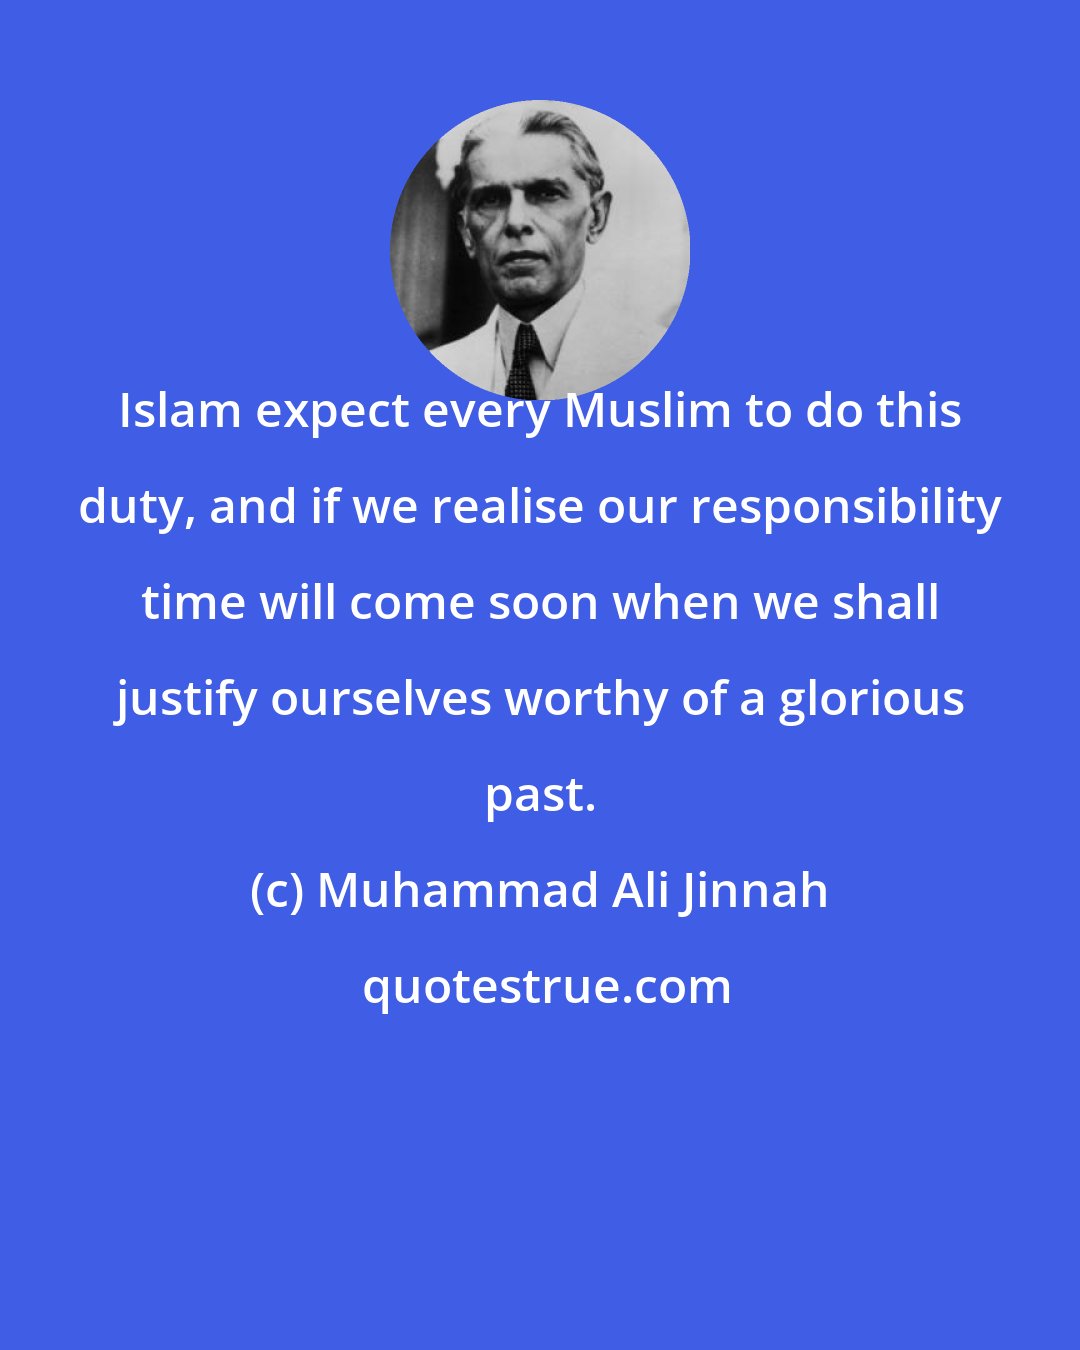 Muhammad Ali Jinnah: Islam expect every Muslim to do this duty, and if we realise our responsibility time will come soon when we shall justify ourselves worthy of a glorious past.